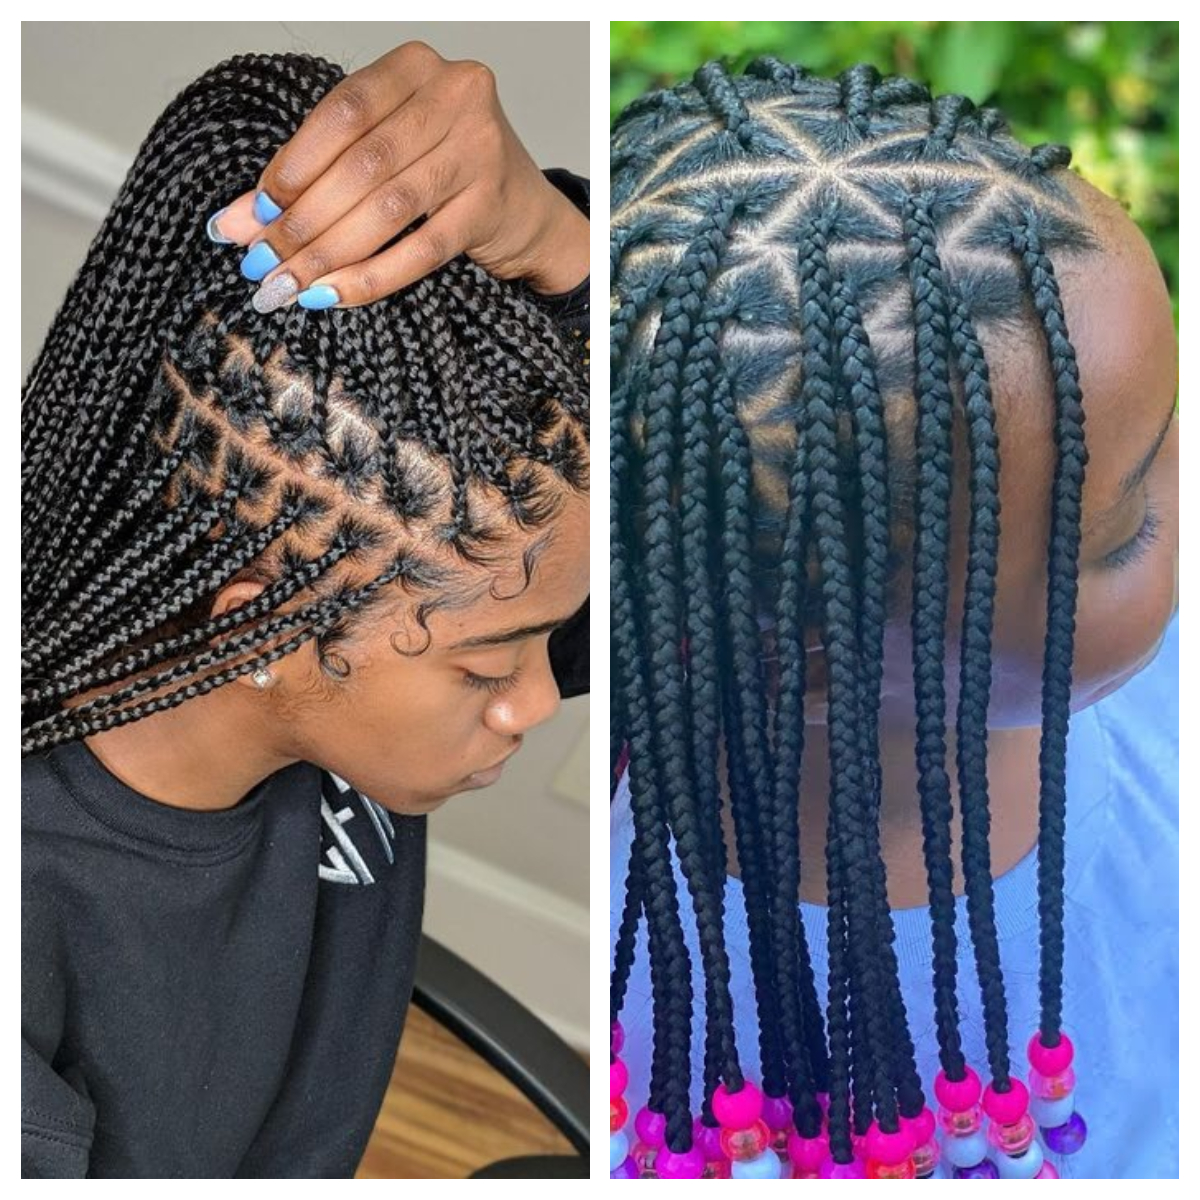 Knotless braids for women and girls [youtube/pinterest]